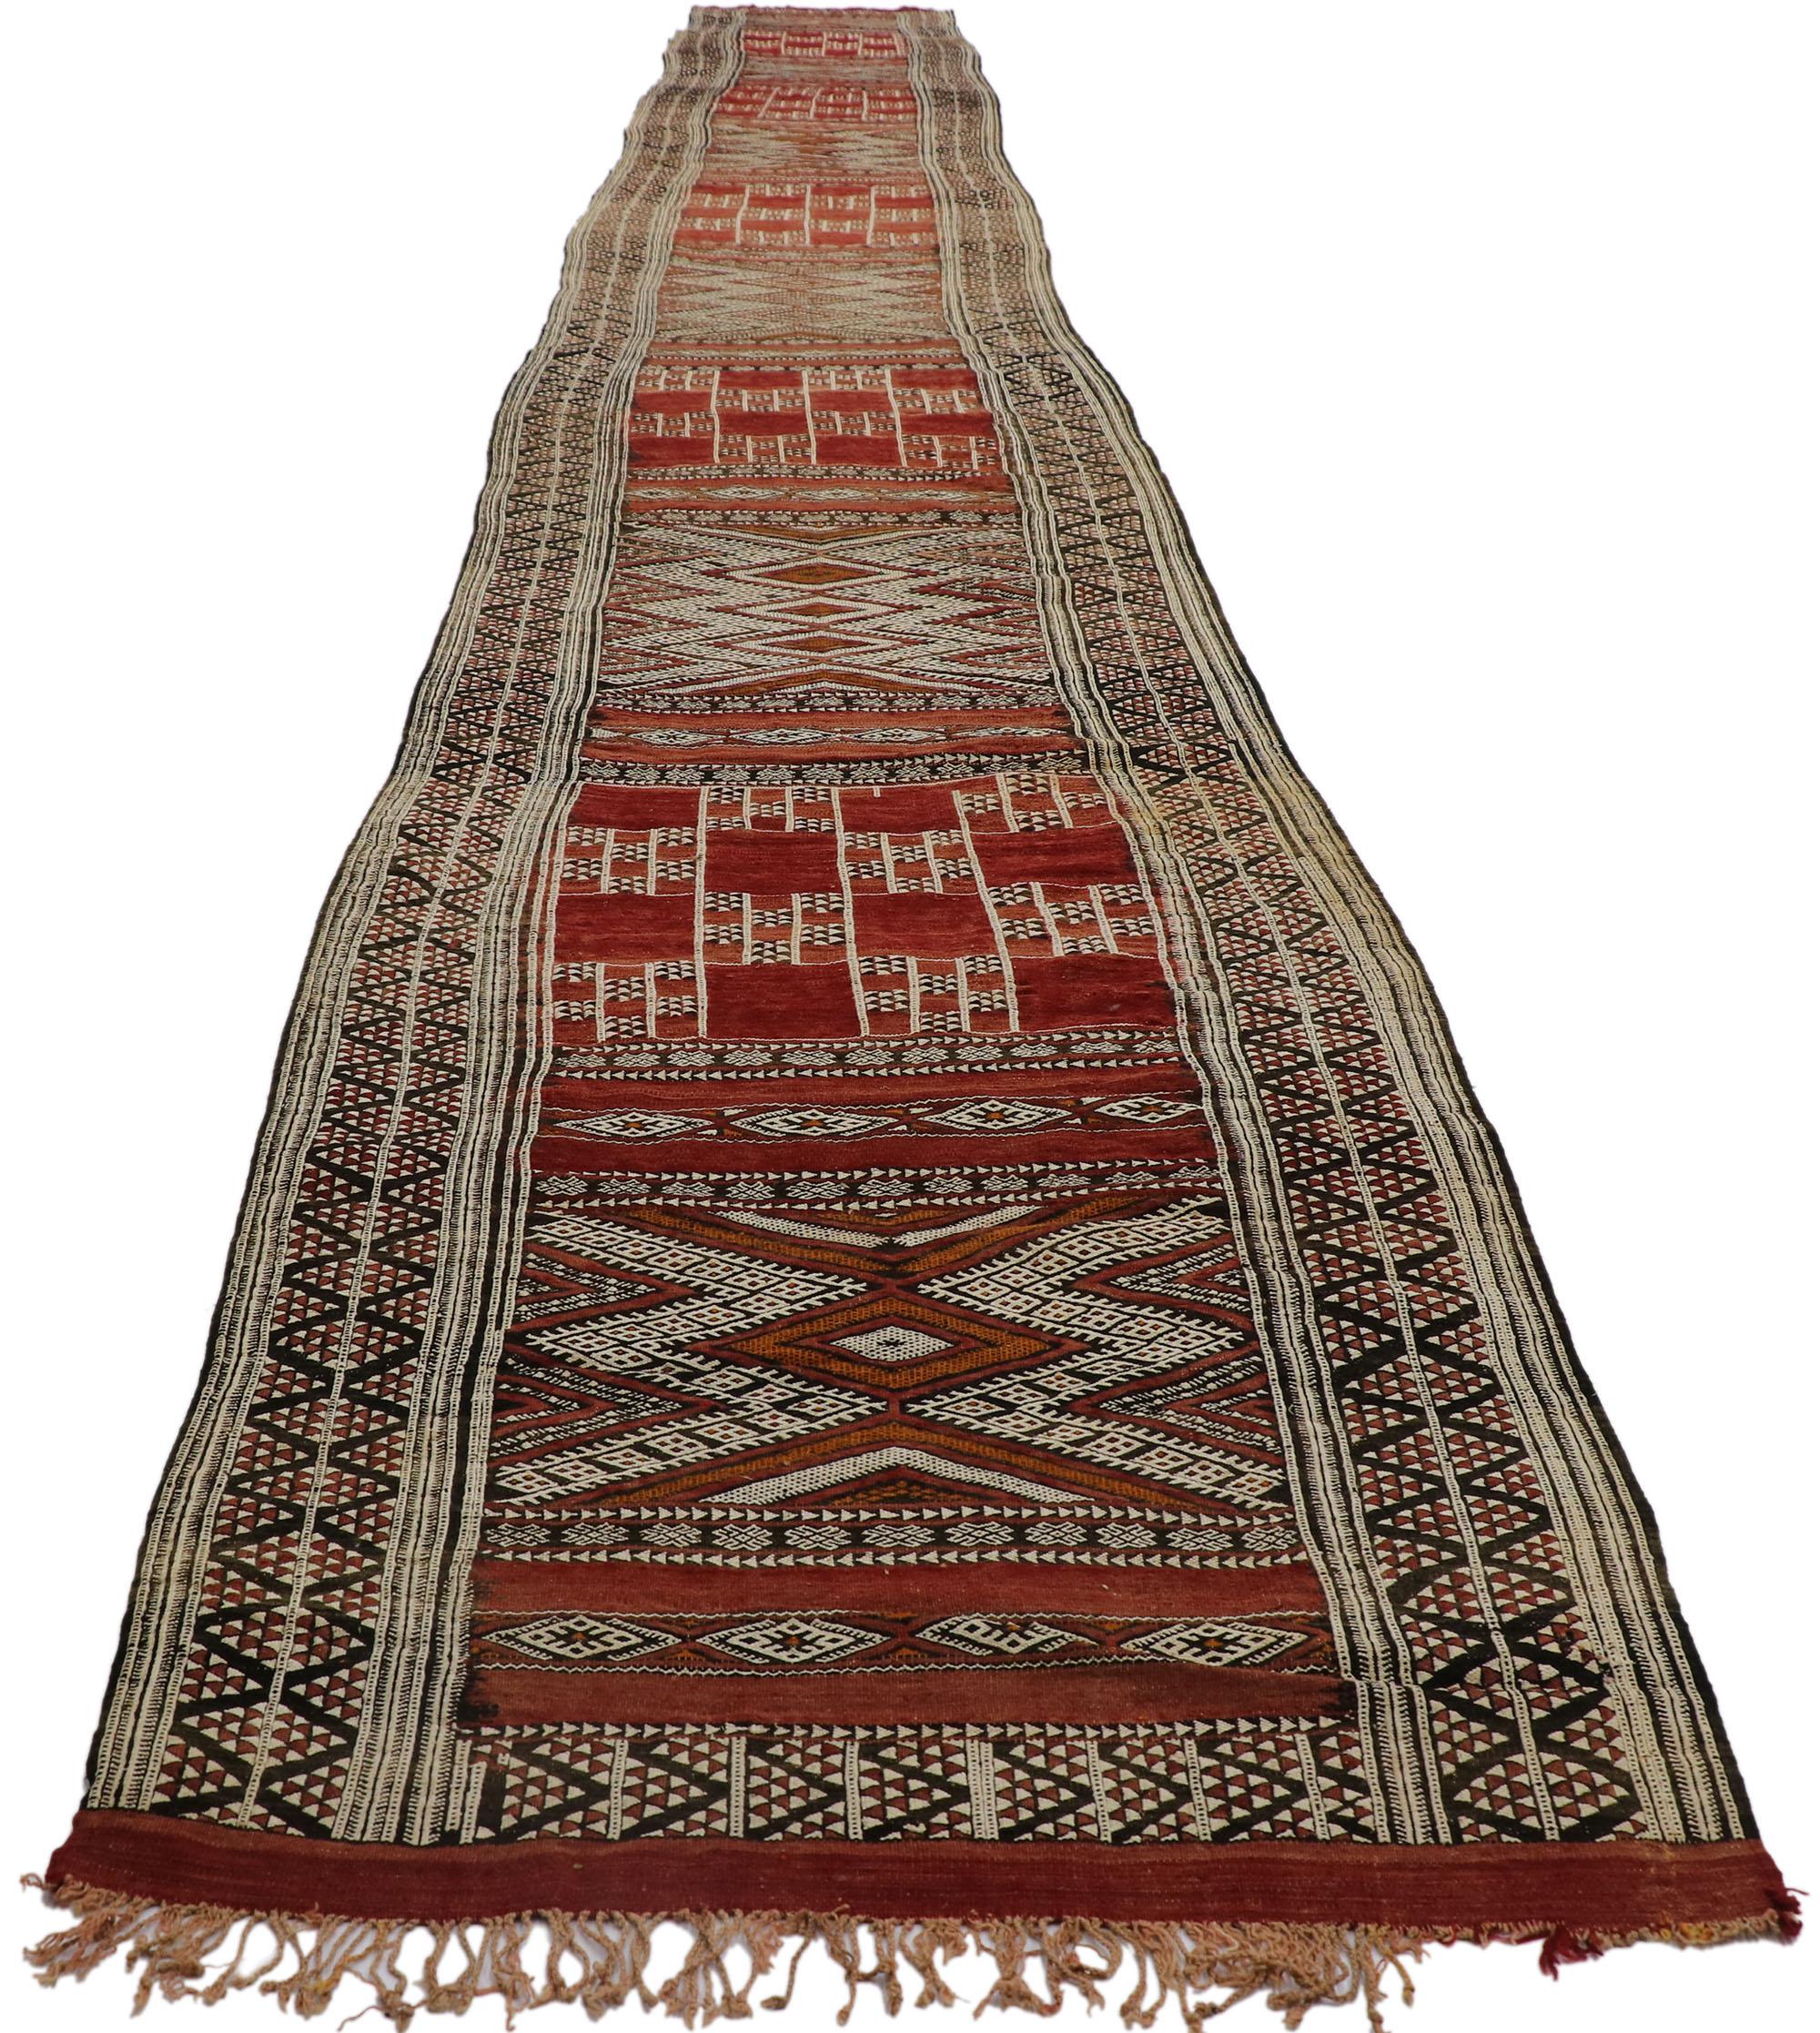 Hand-Woven Vintage Berber Zemmour Moroccan Kilim Runner with Tribal Style